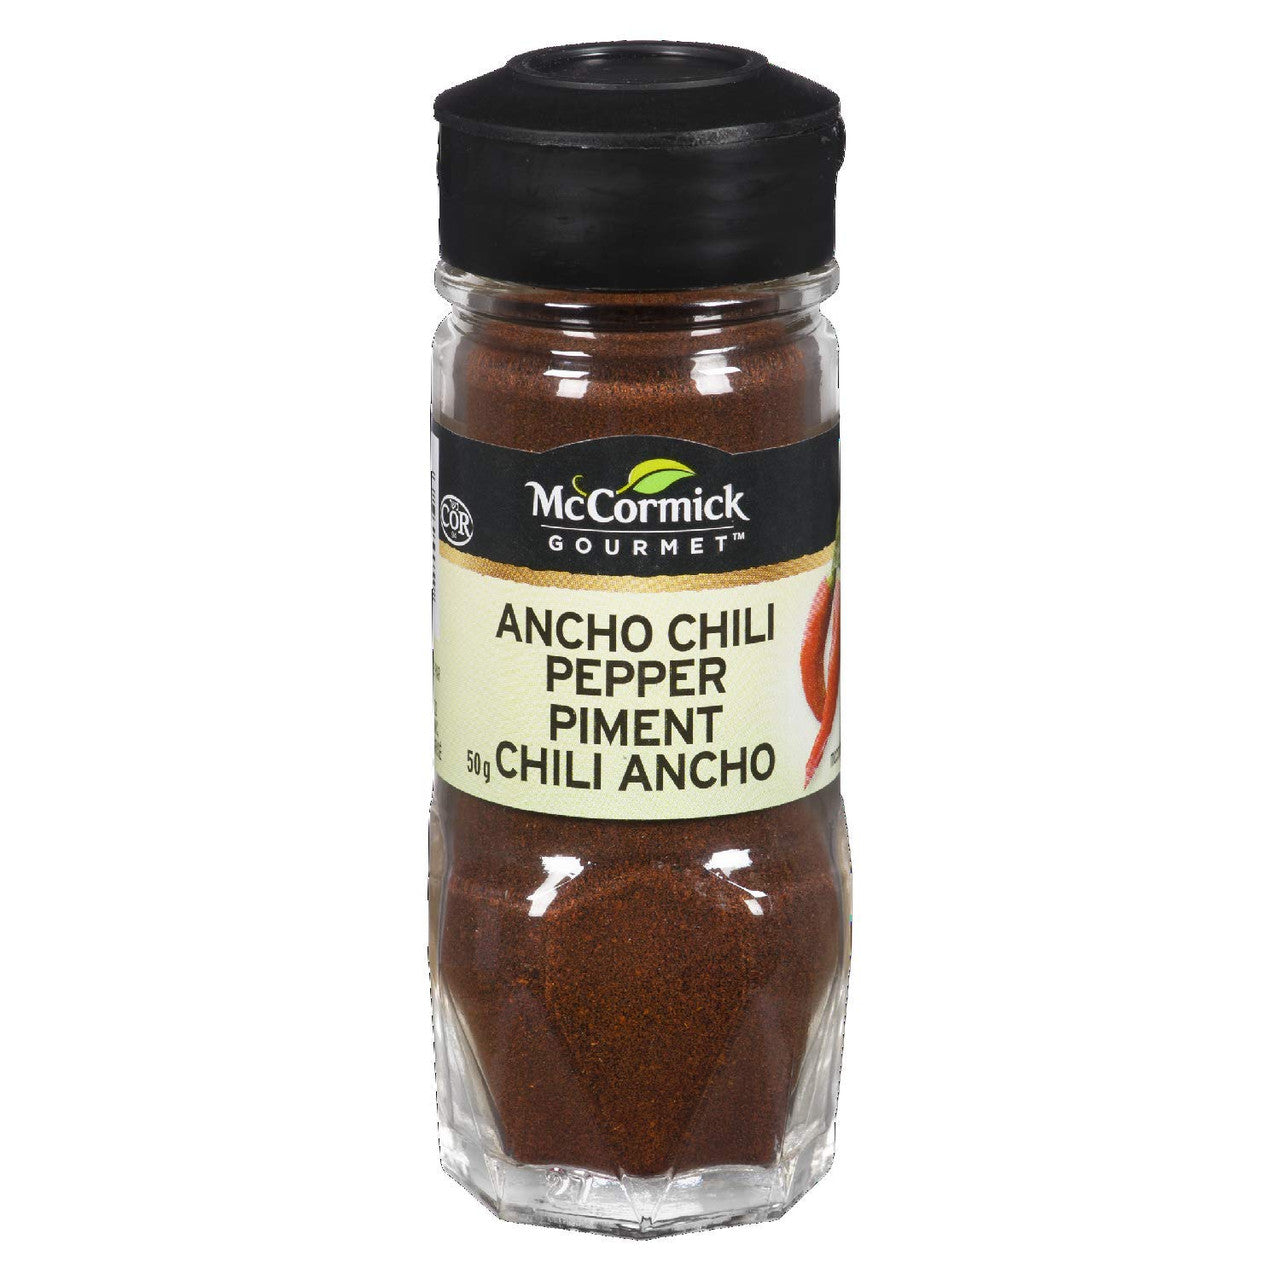 McCormick Gourmet, Ancho Chili Pepper, 50g/1.8oz., {Imported from Canada}